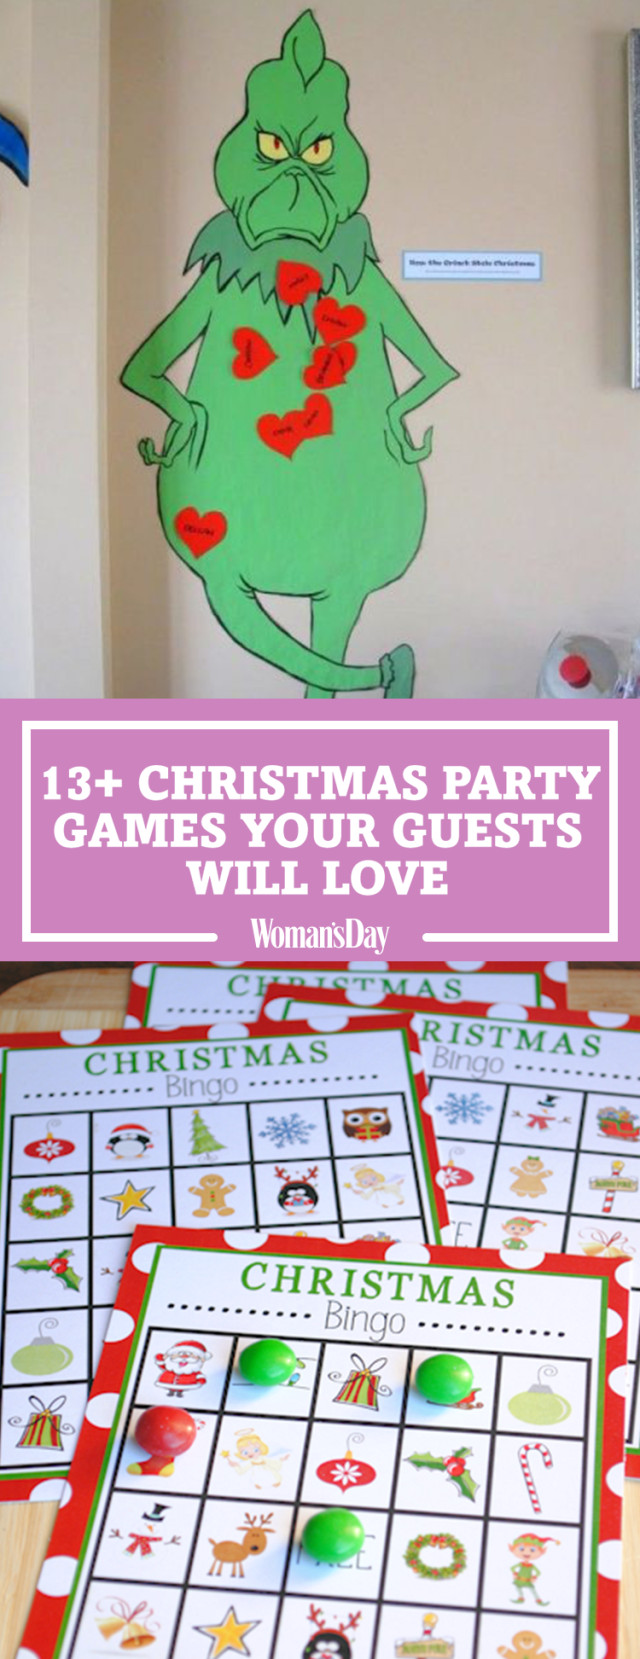 Holiday Party Game Ideas For Work
 The ly Christmas Games You ll Need for Your Next Holiday